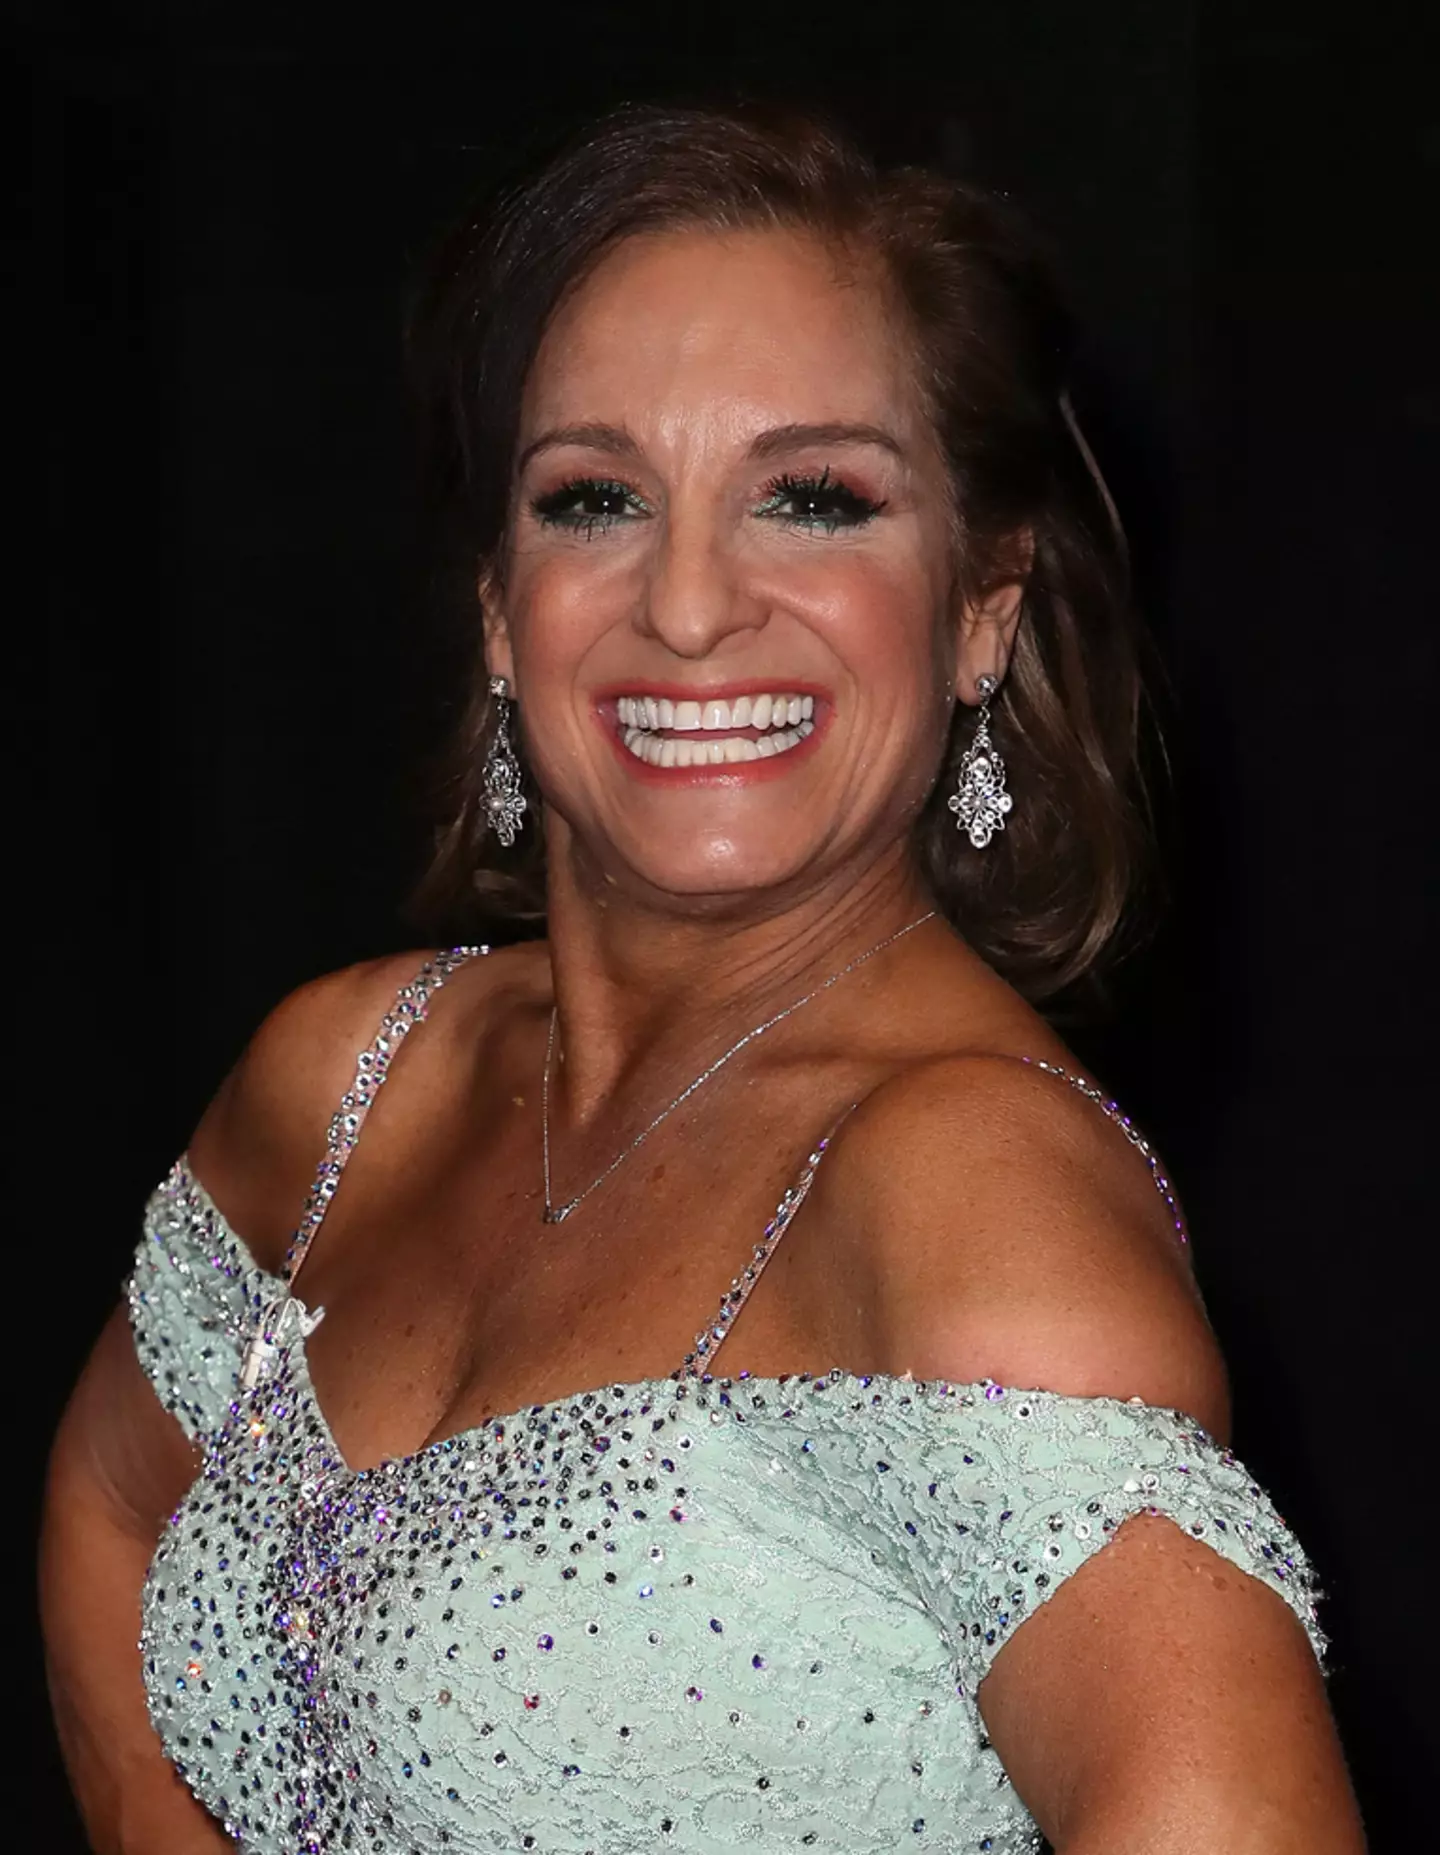 Mary Lou Retton has been in the ICU for 'over a week'.